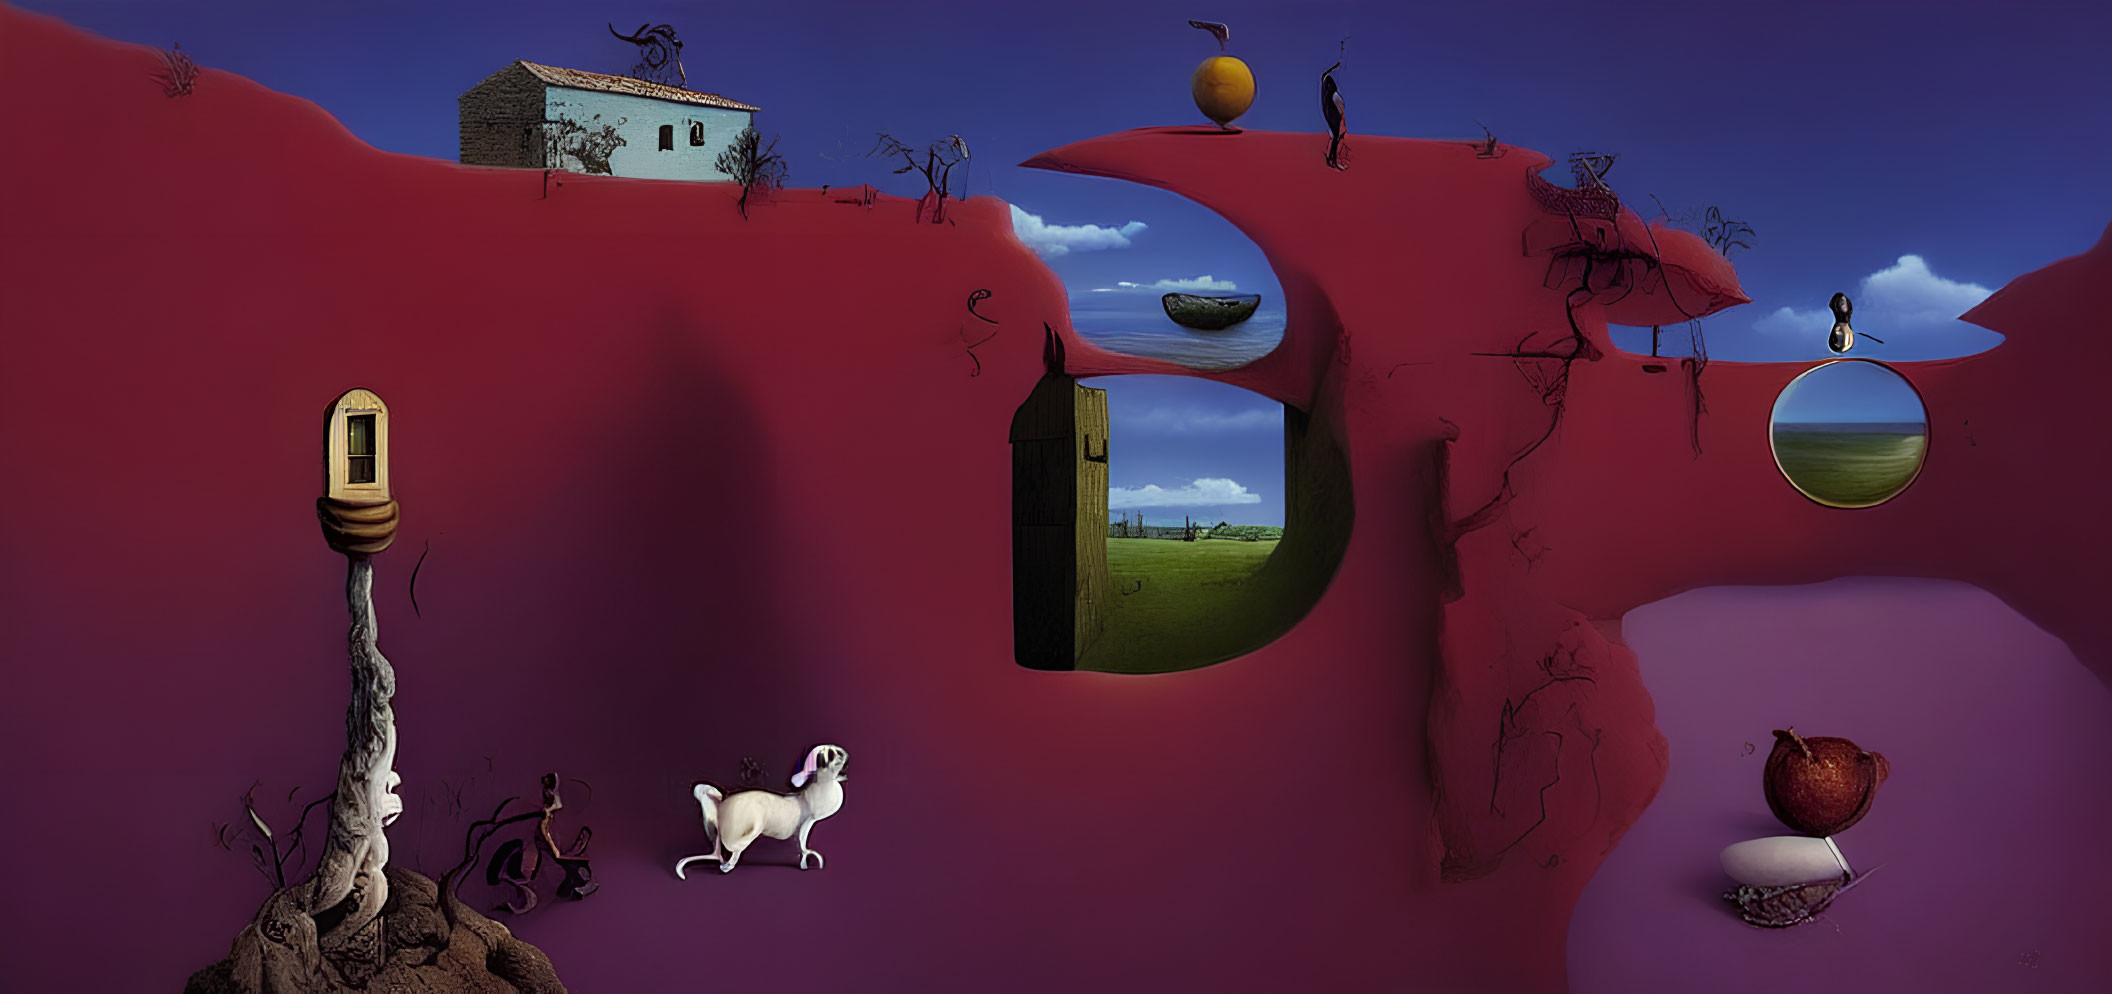 Surreal landscape with red sky, holes, white dog, and pomegranate